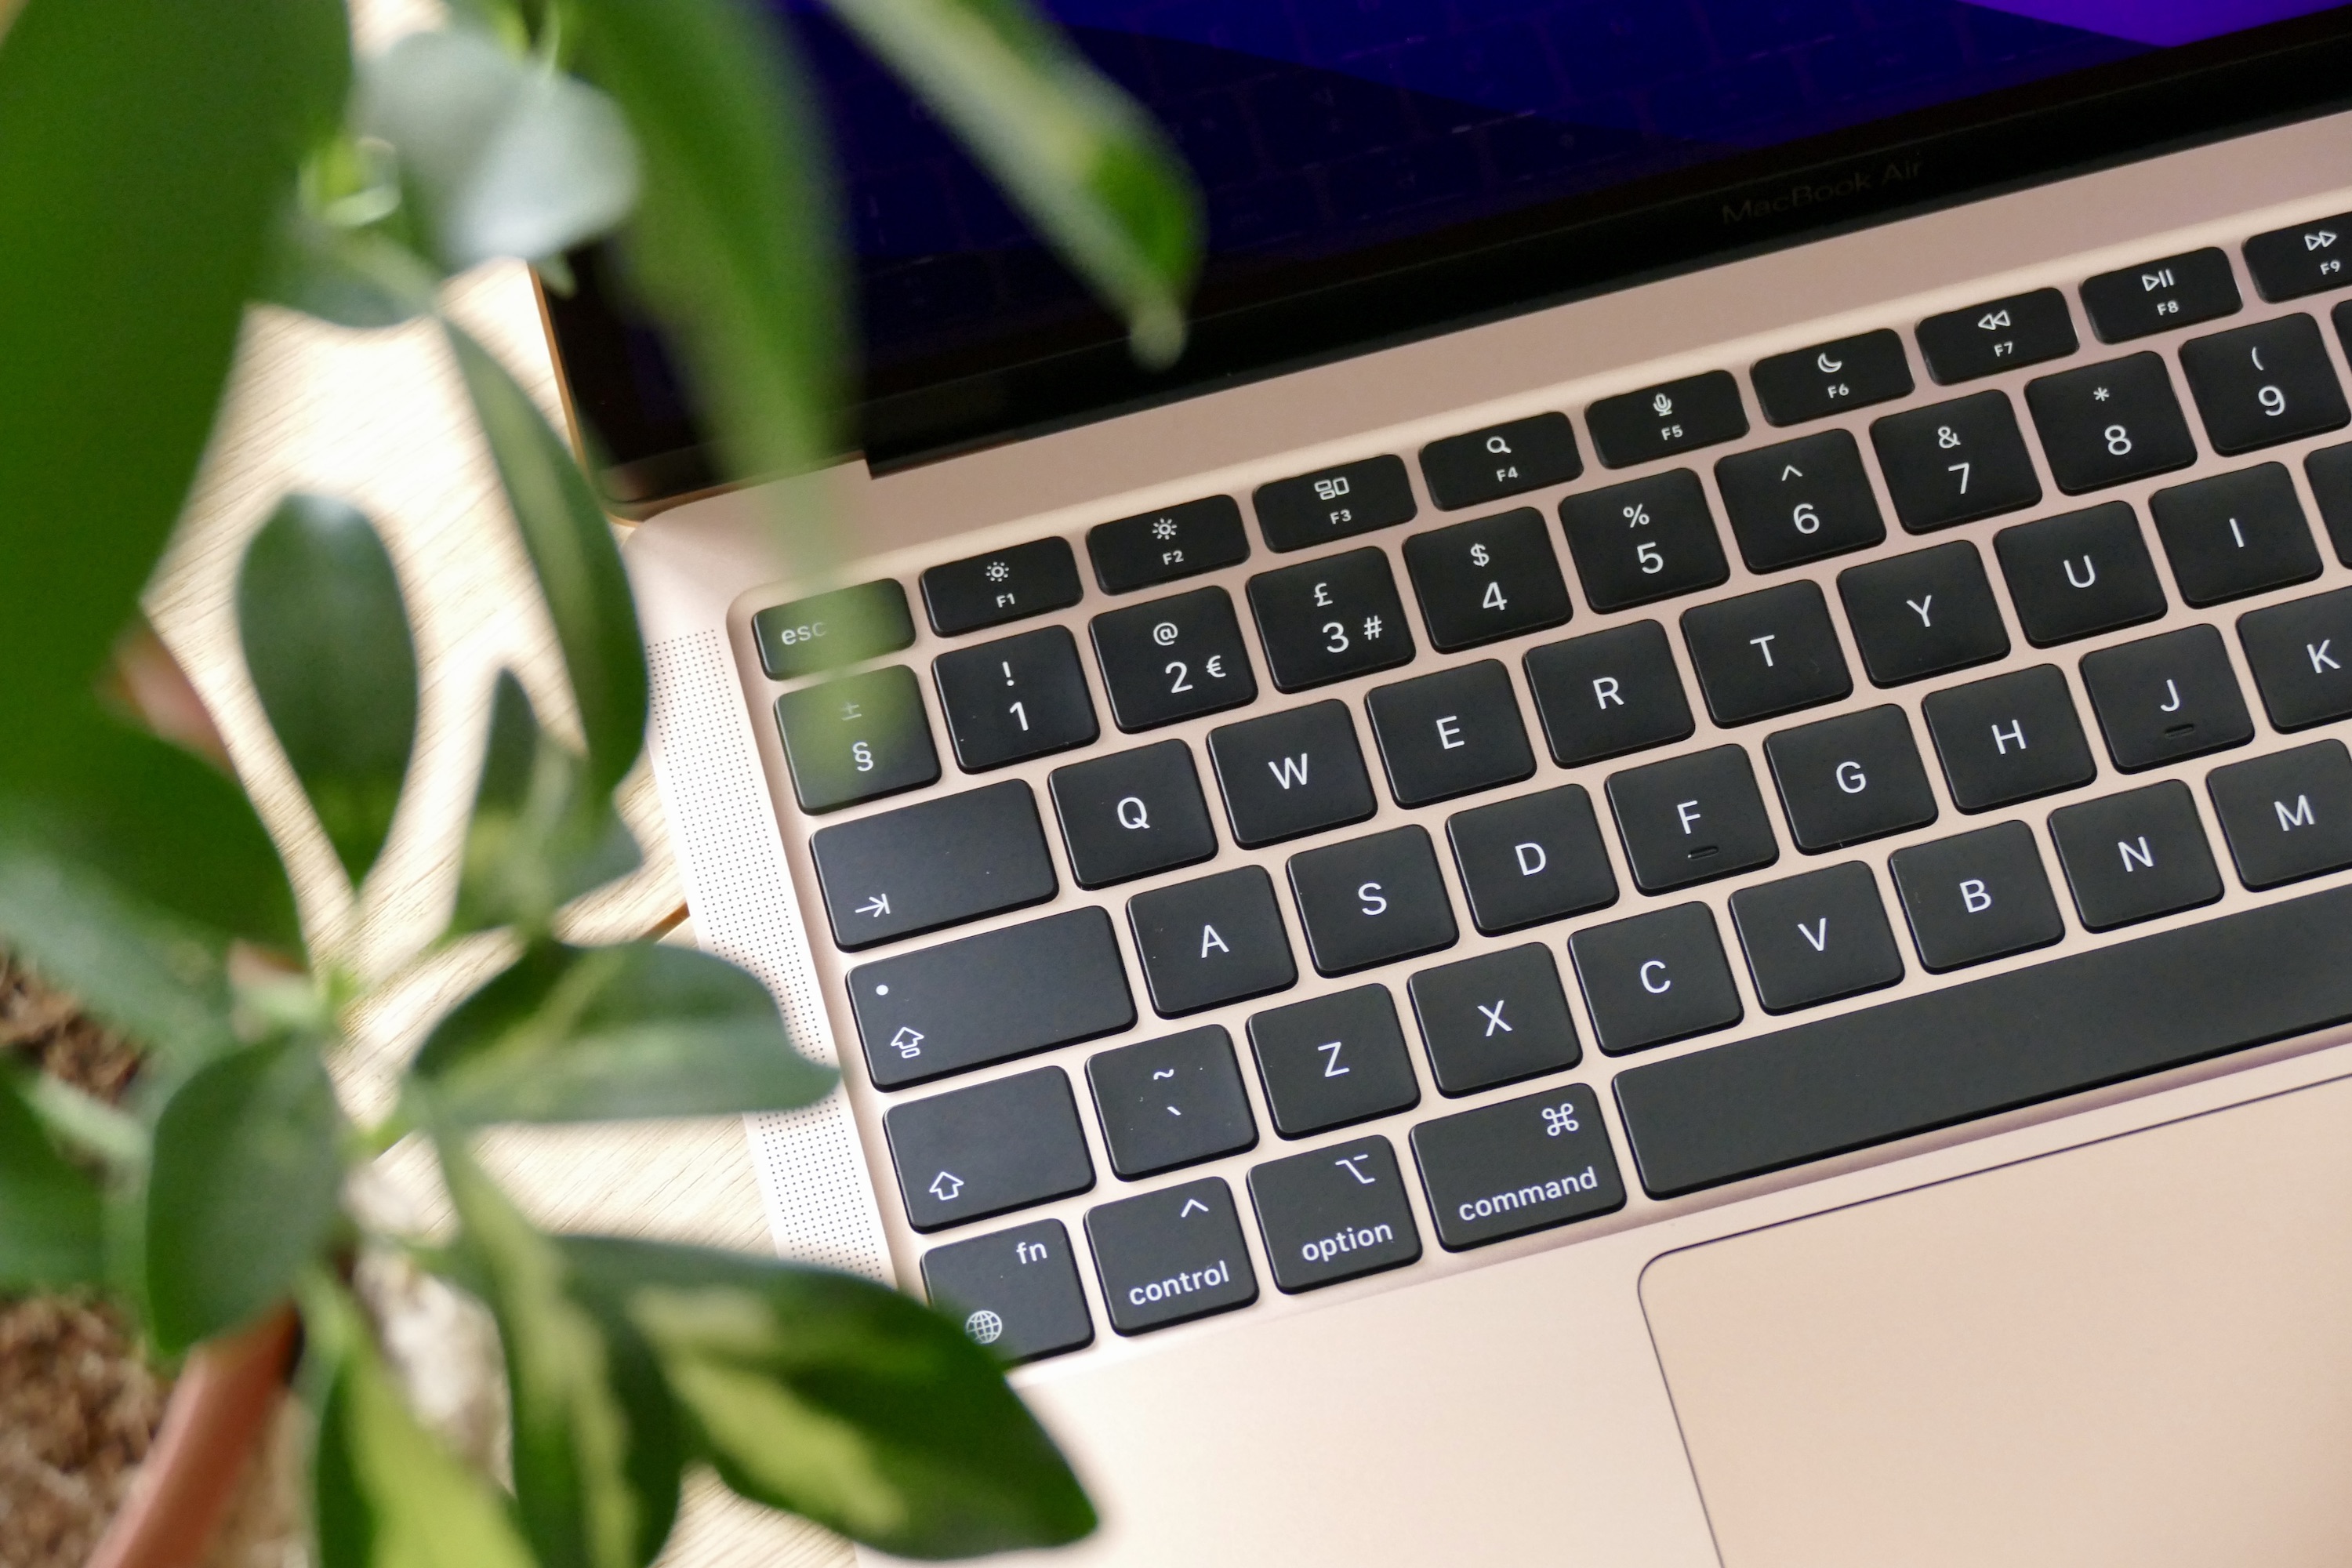 Seeing the MacBook Air M2 convinced me to buy the M1 instead